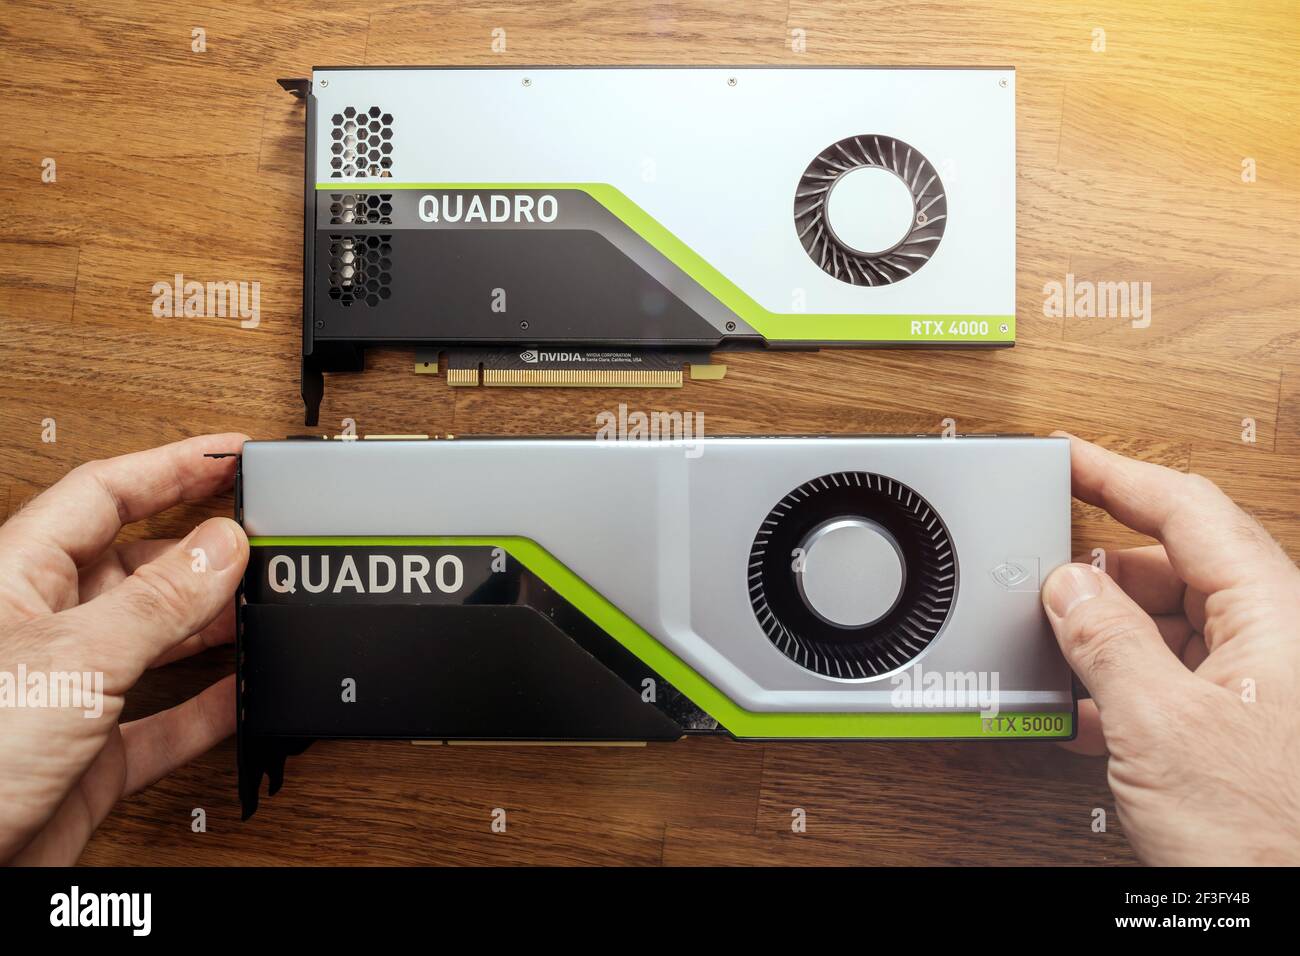 Senior hands pov holding looking comparing two GPU Quadro RTX 4000 5000 based on the Turing microarchitecture, and features Stock Photo - Alamy